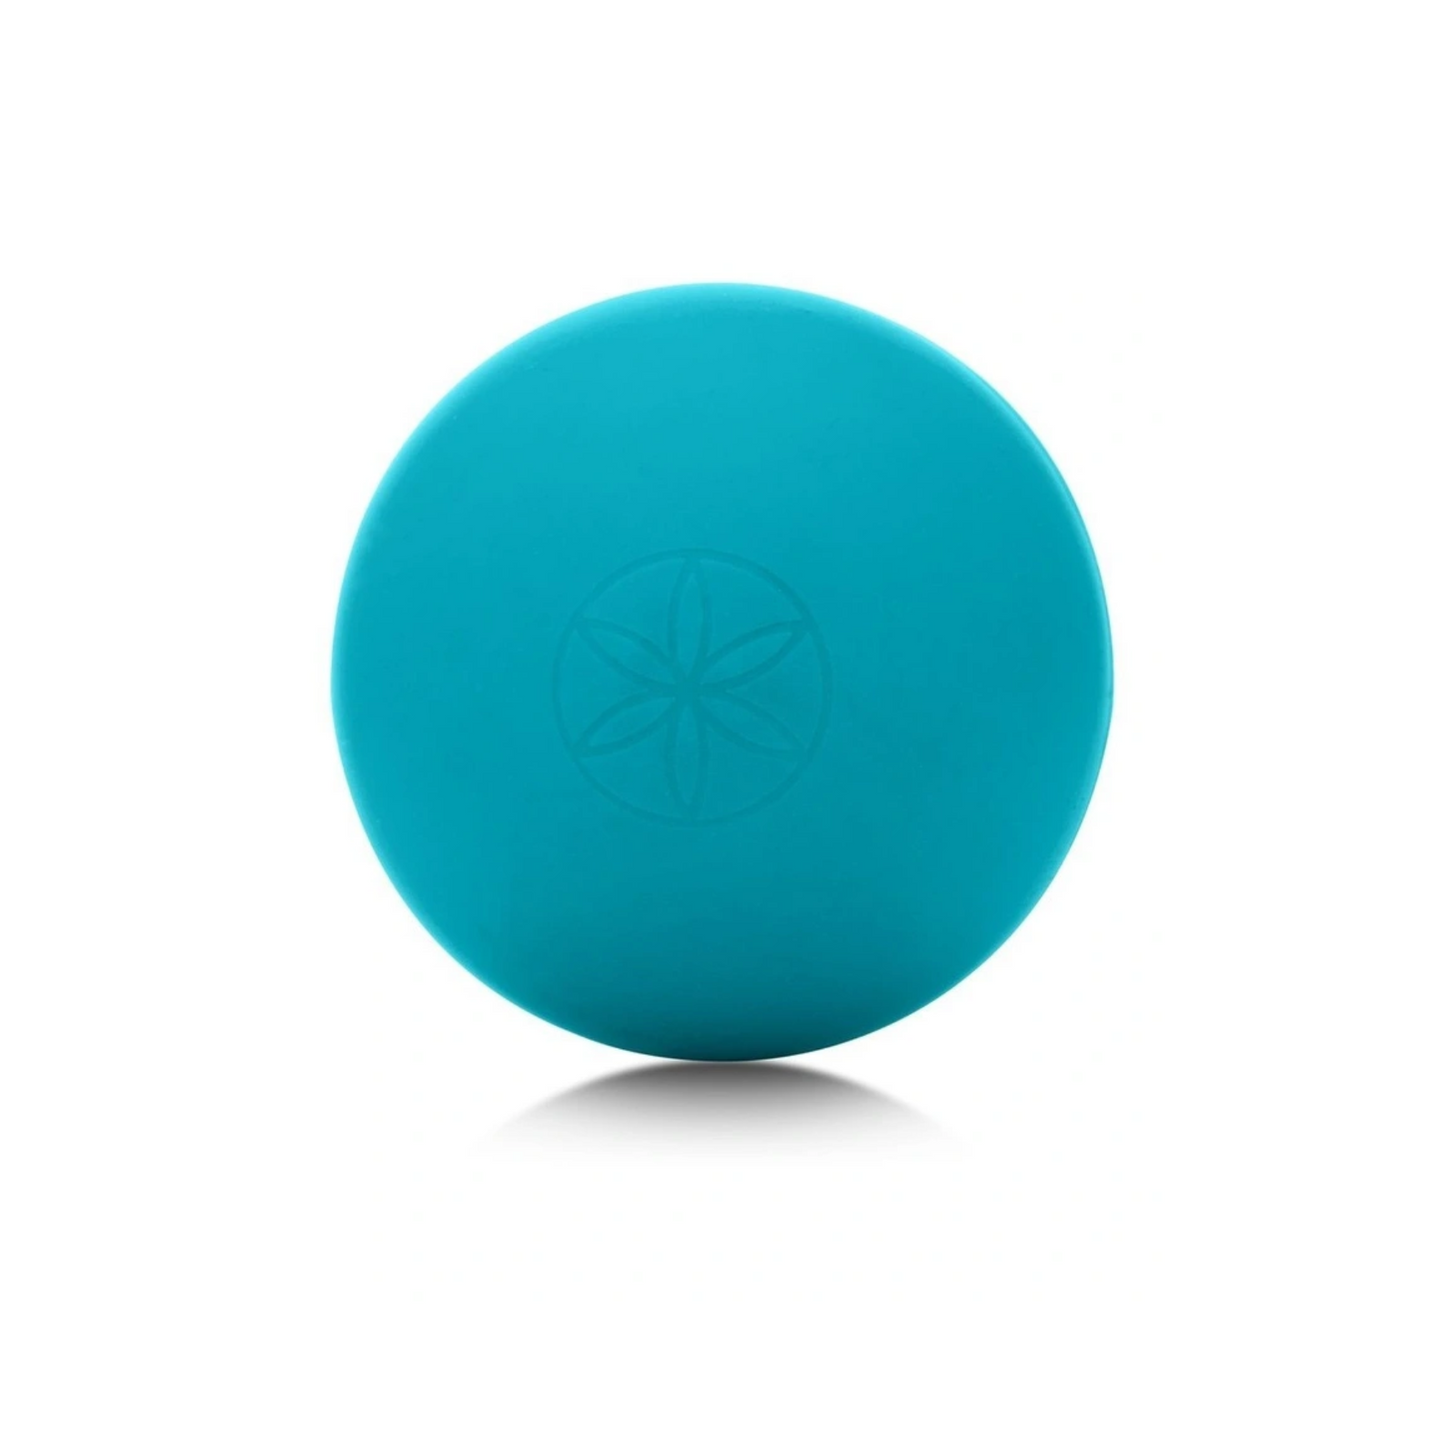 Gaiam Wellness No Knots Massage Ball, Relieve Tensions and Stiffness